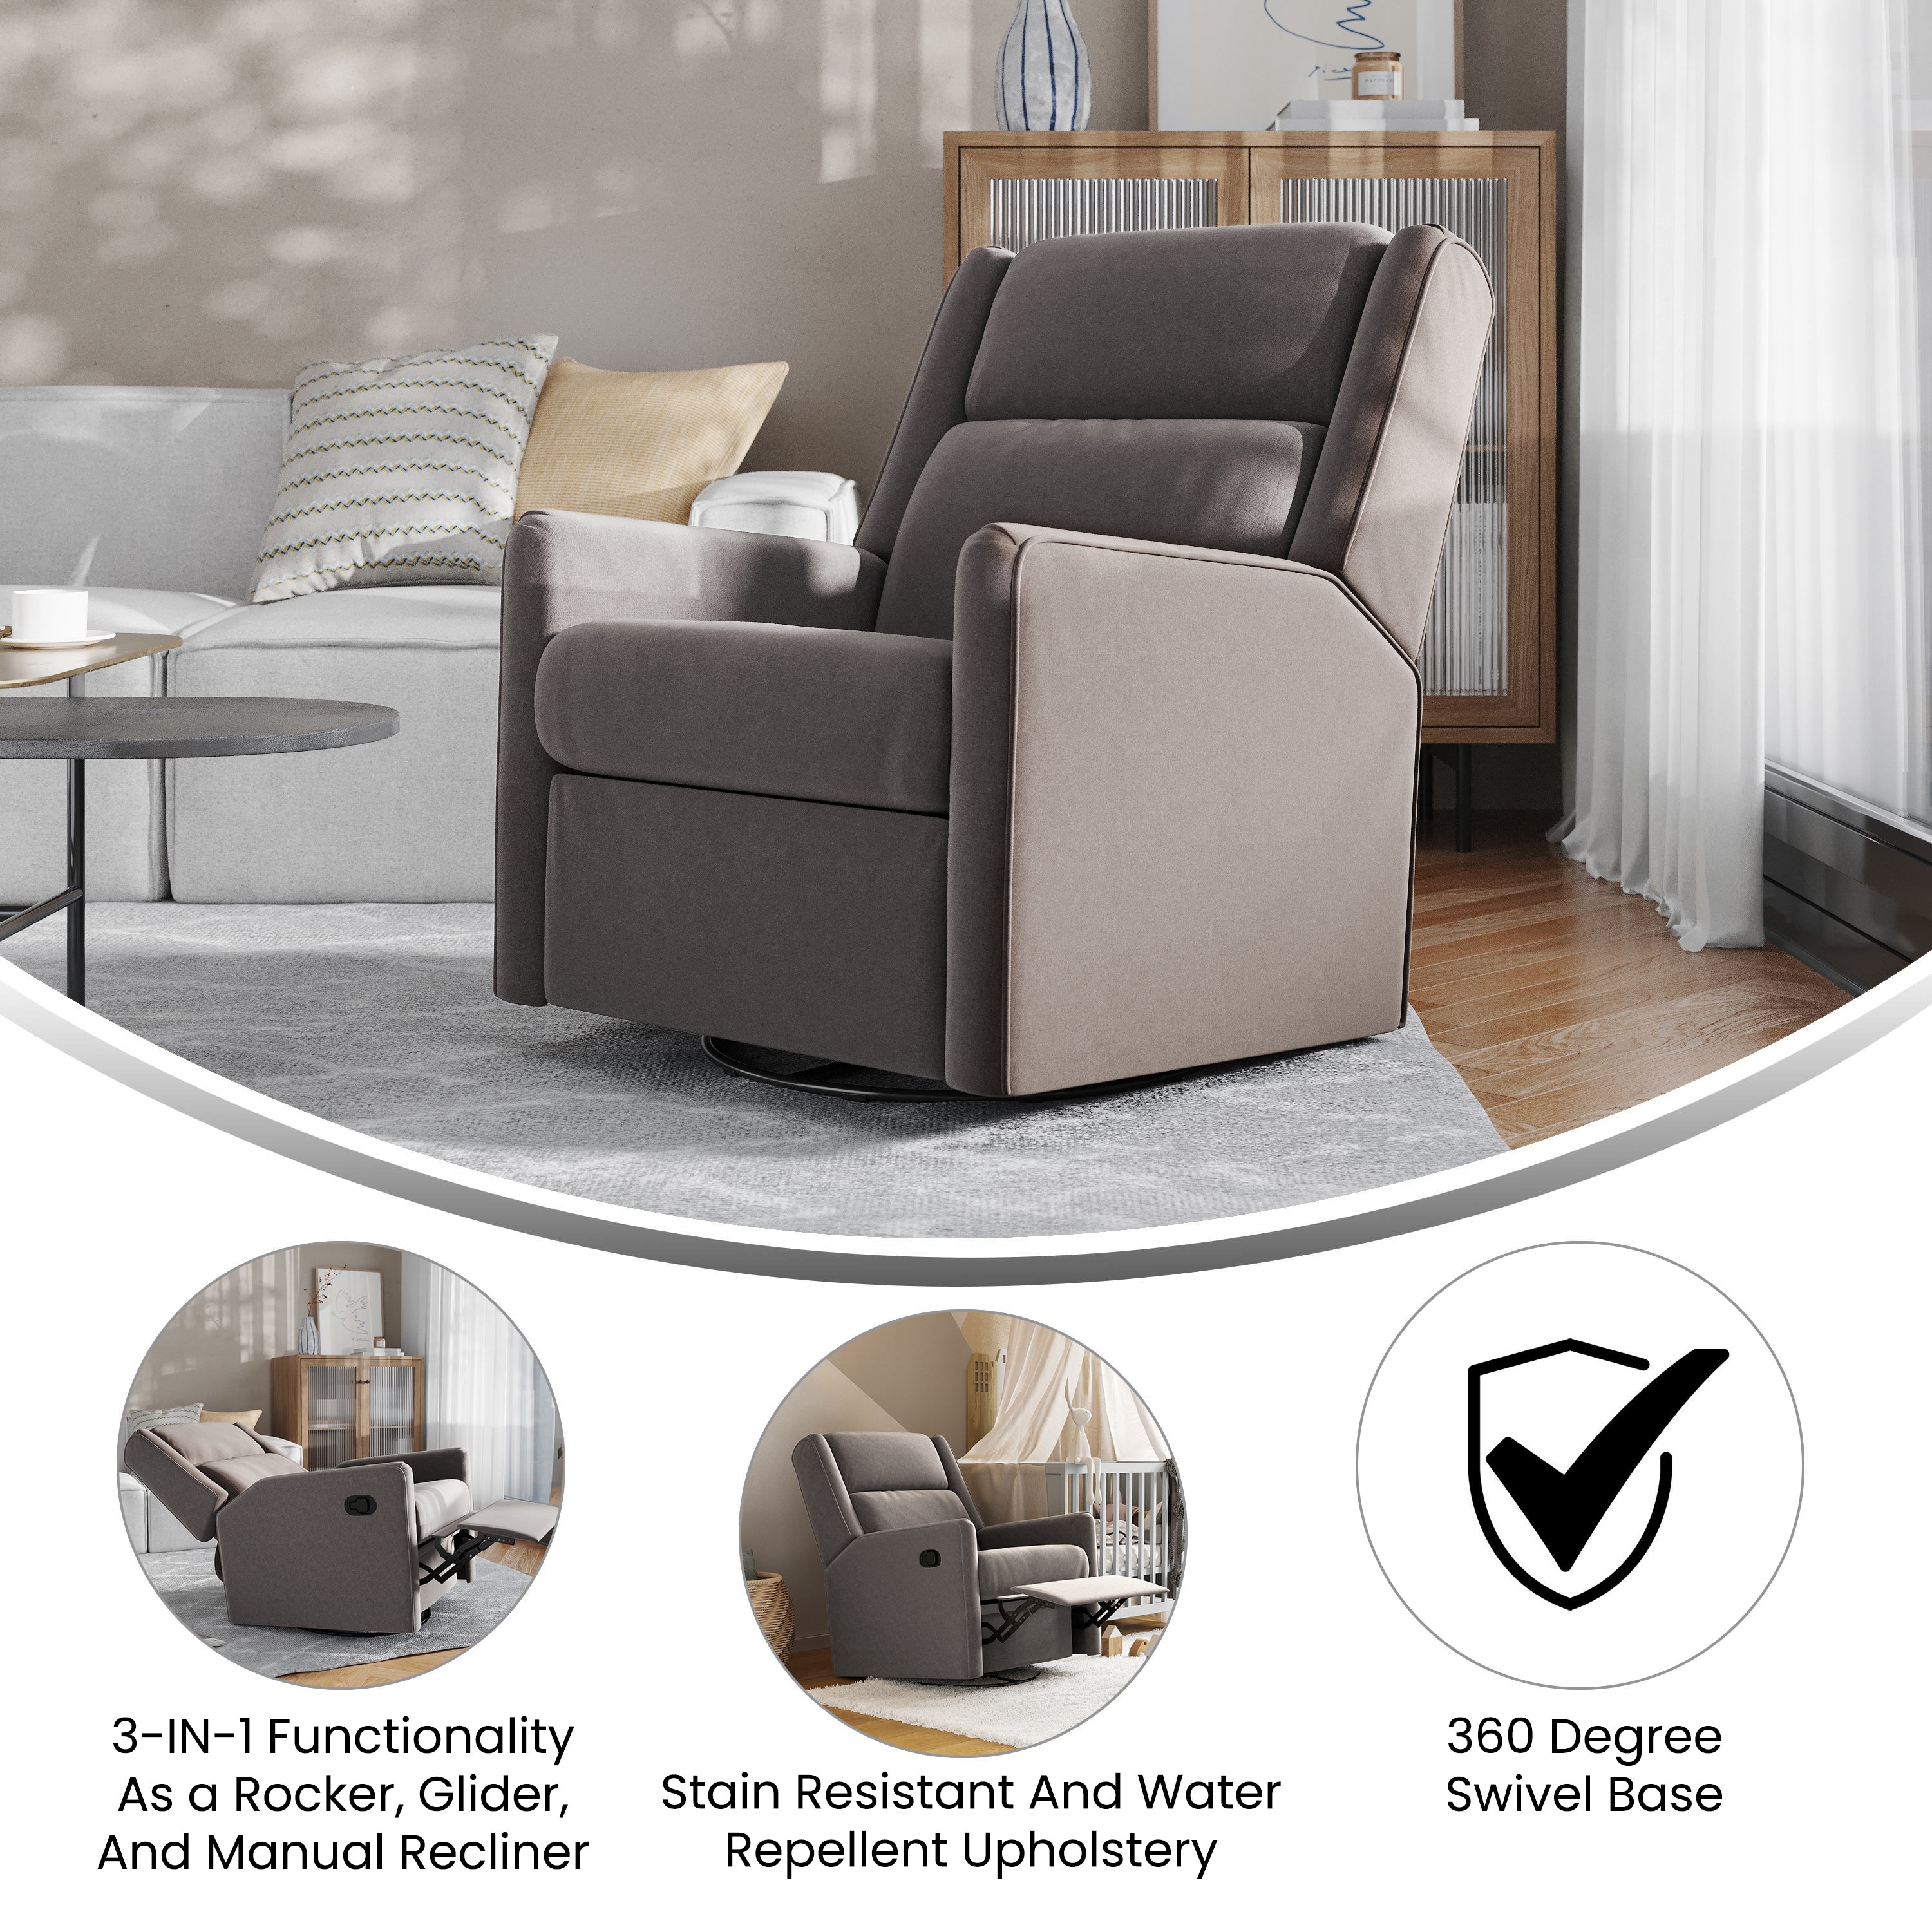 Cash Swivel Glider Rocker Recliner Chair, Manual 360 Degree Swivel Recliner Perfect for Living Room, Bedroom, or Nursery-Manual Recliners-Flash Furniture-Wall2Wall Furnishings